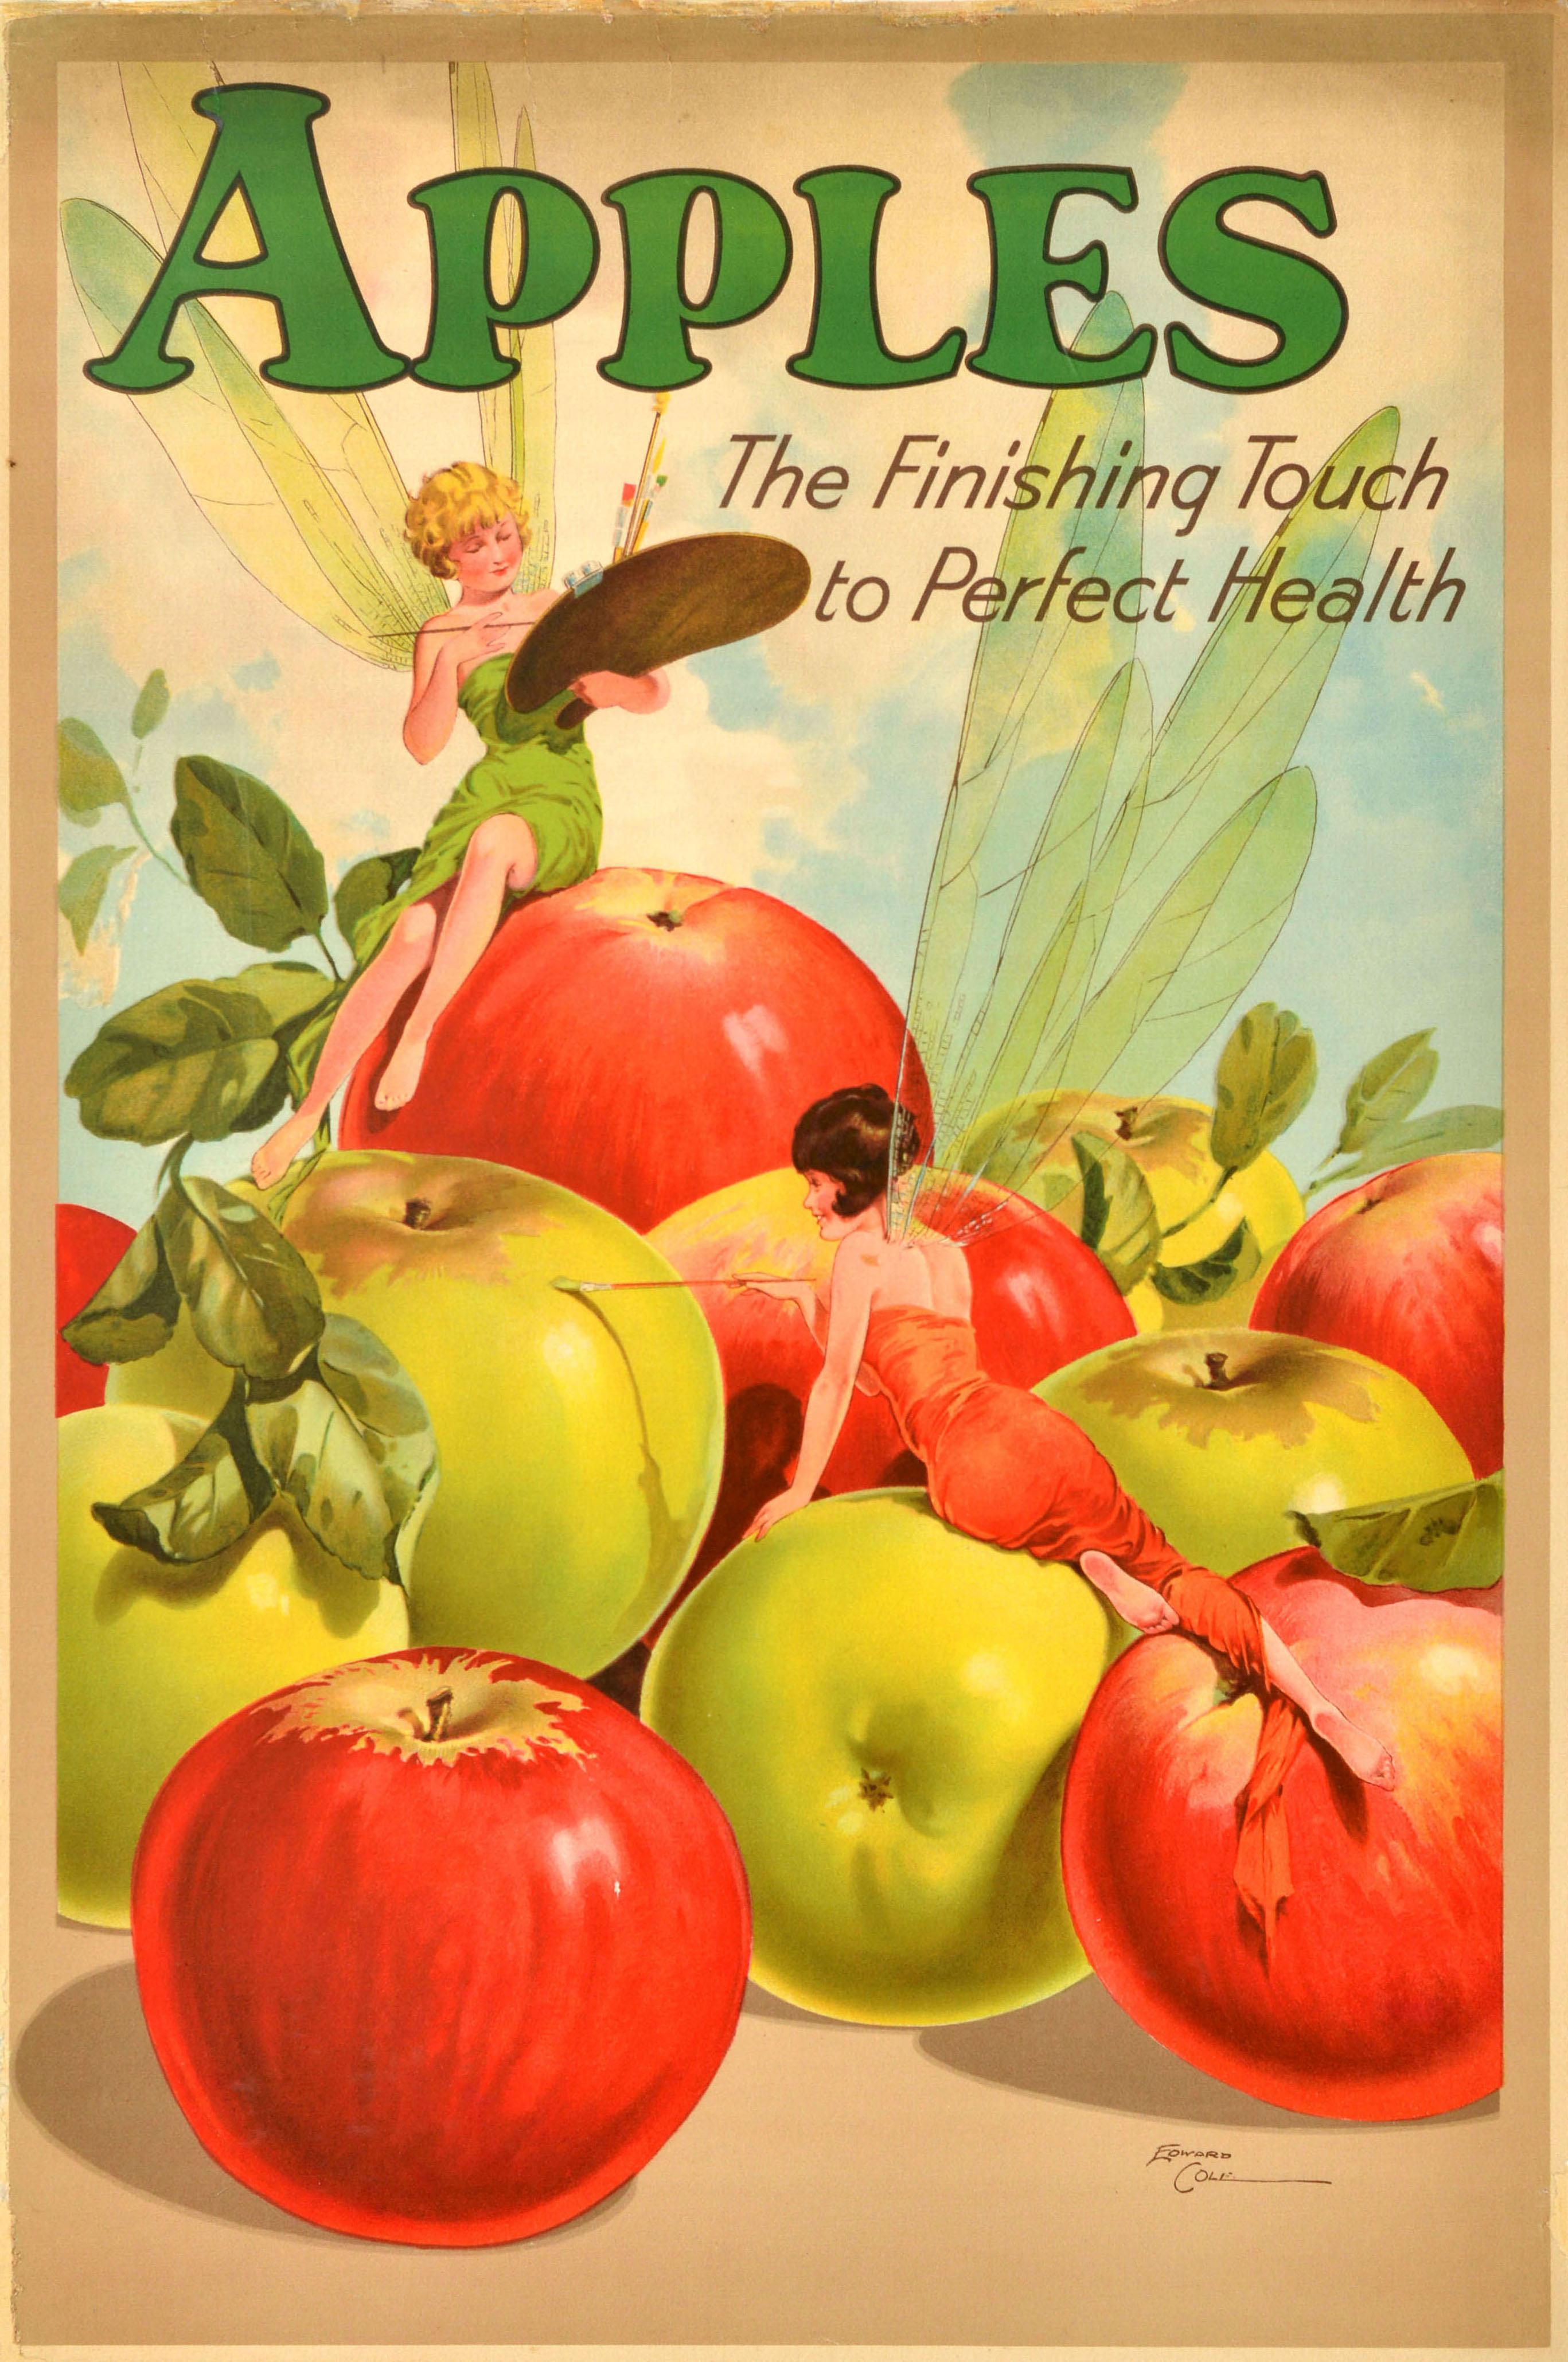 Edward Cole Print - Original Vintage Food Advertising Poster Apples Finishing Touch Perfect Health